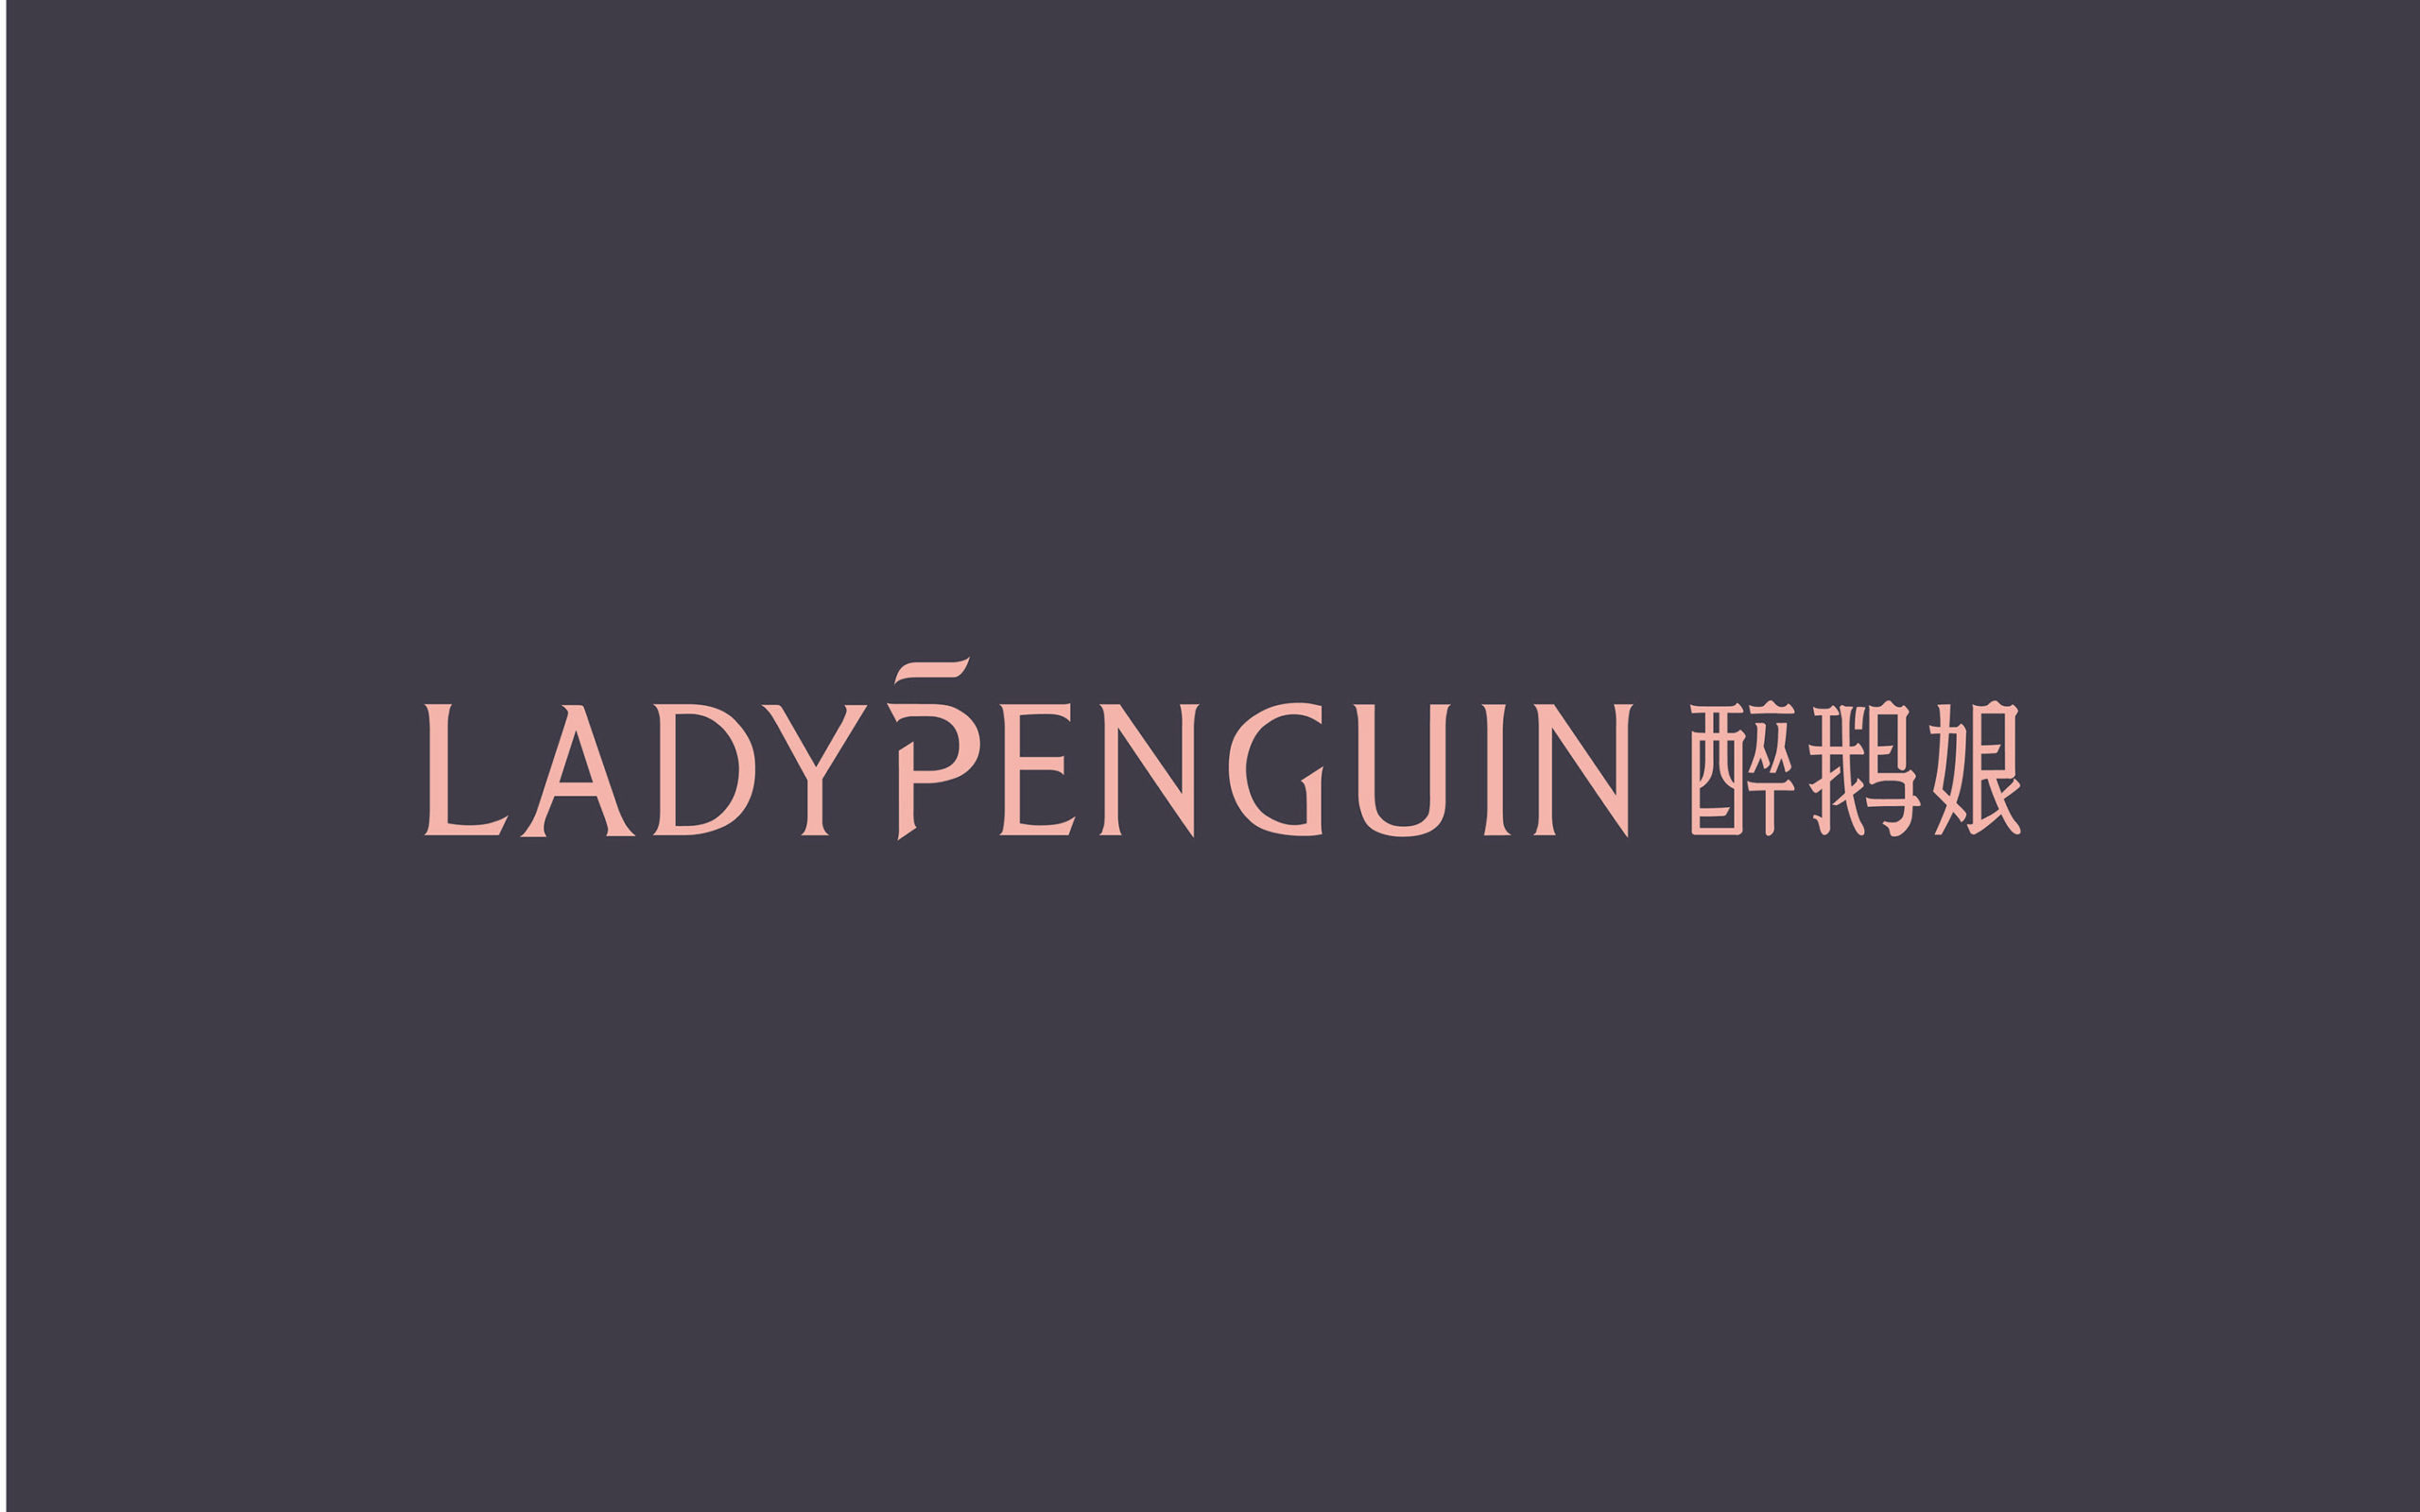 You are currently viewing LadyPenguin